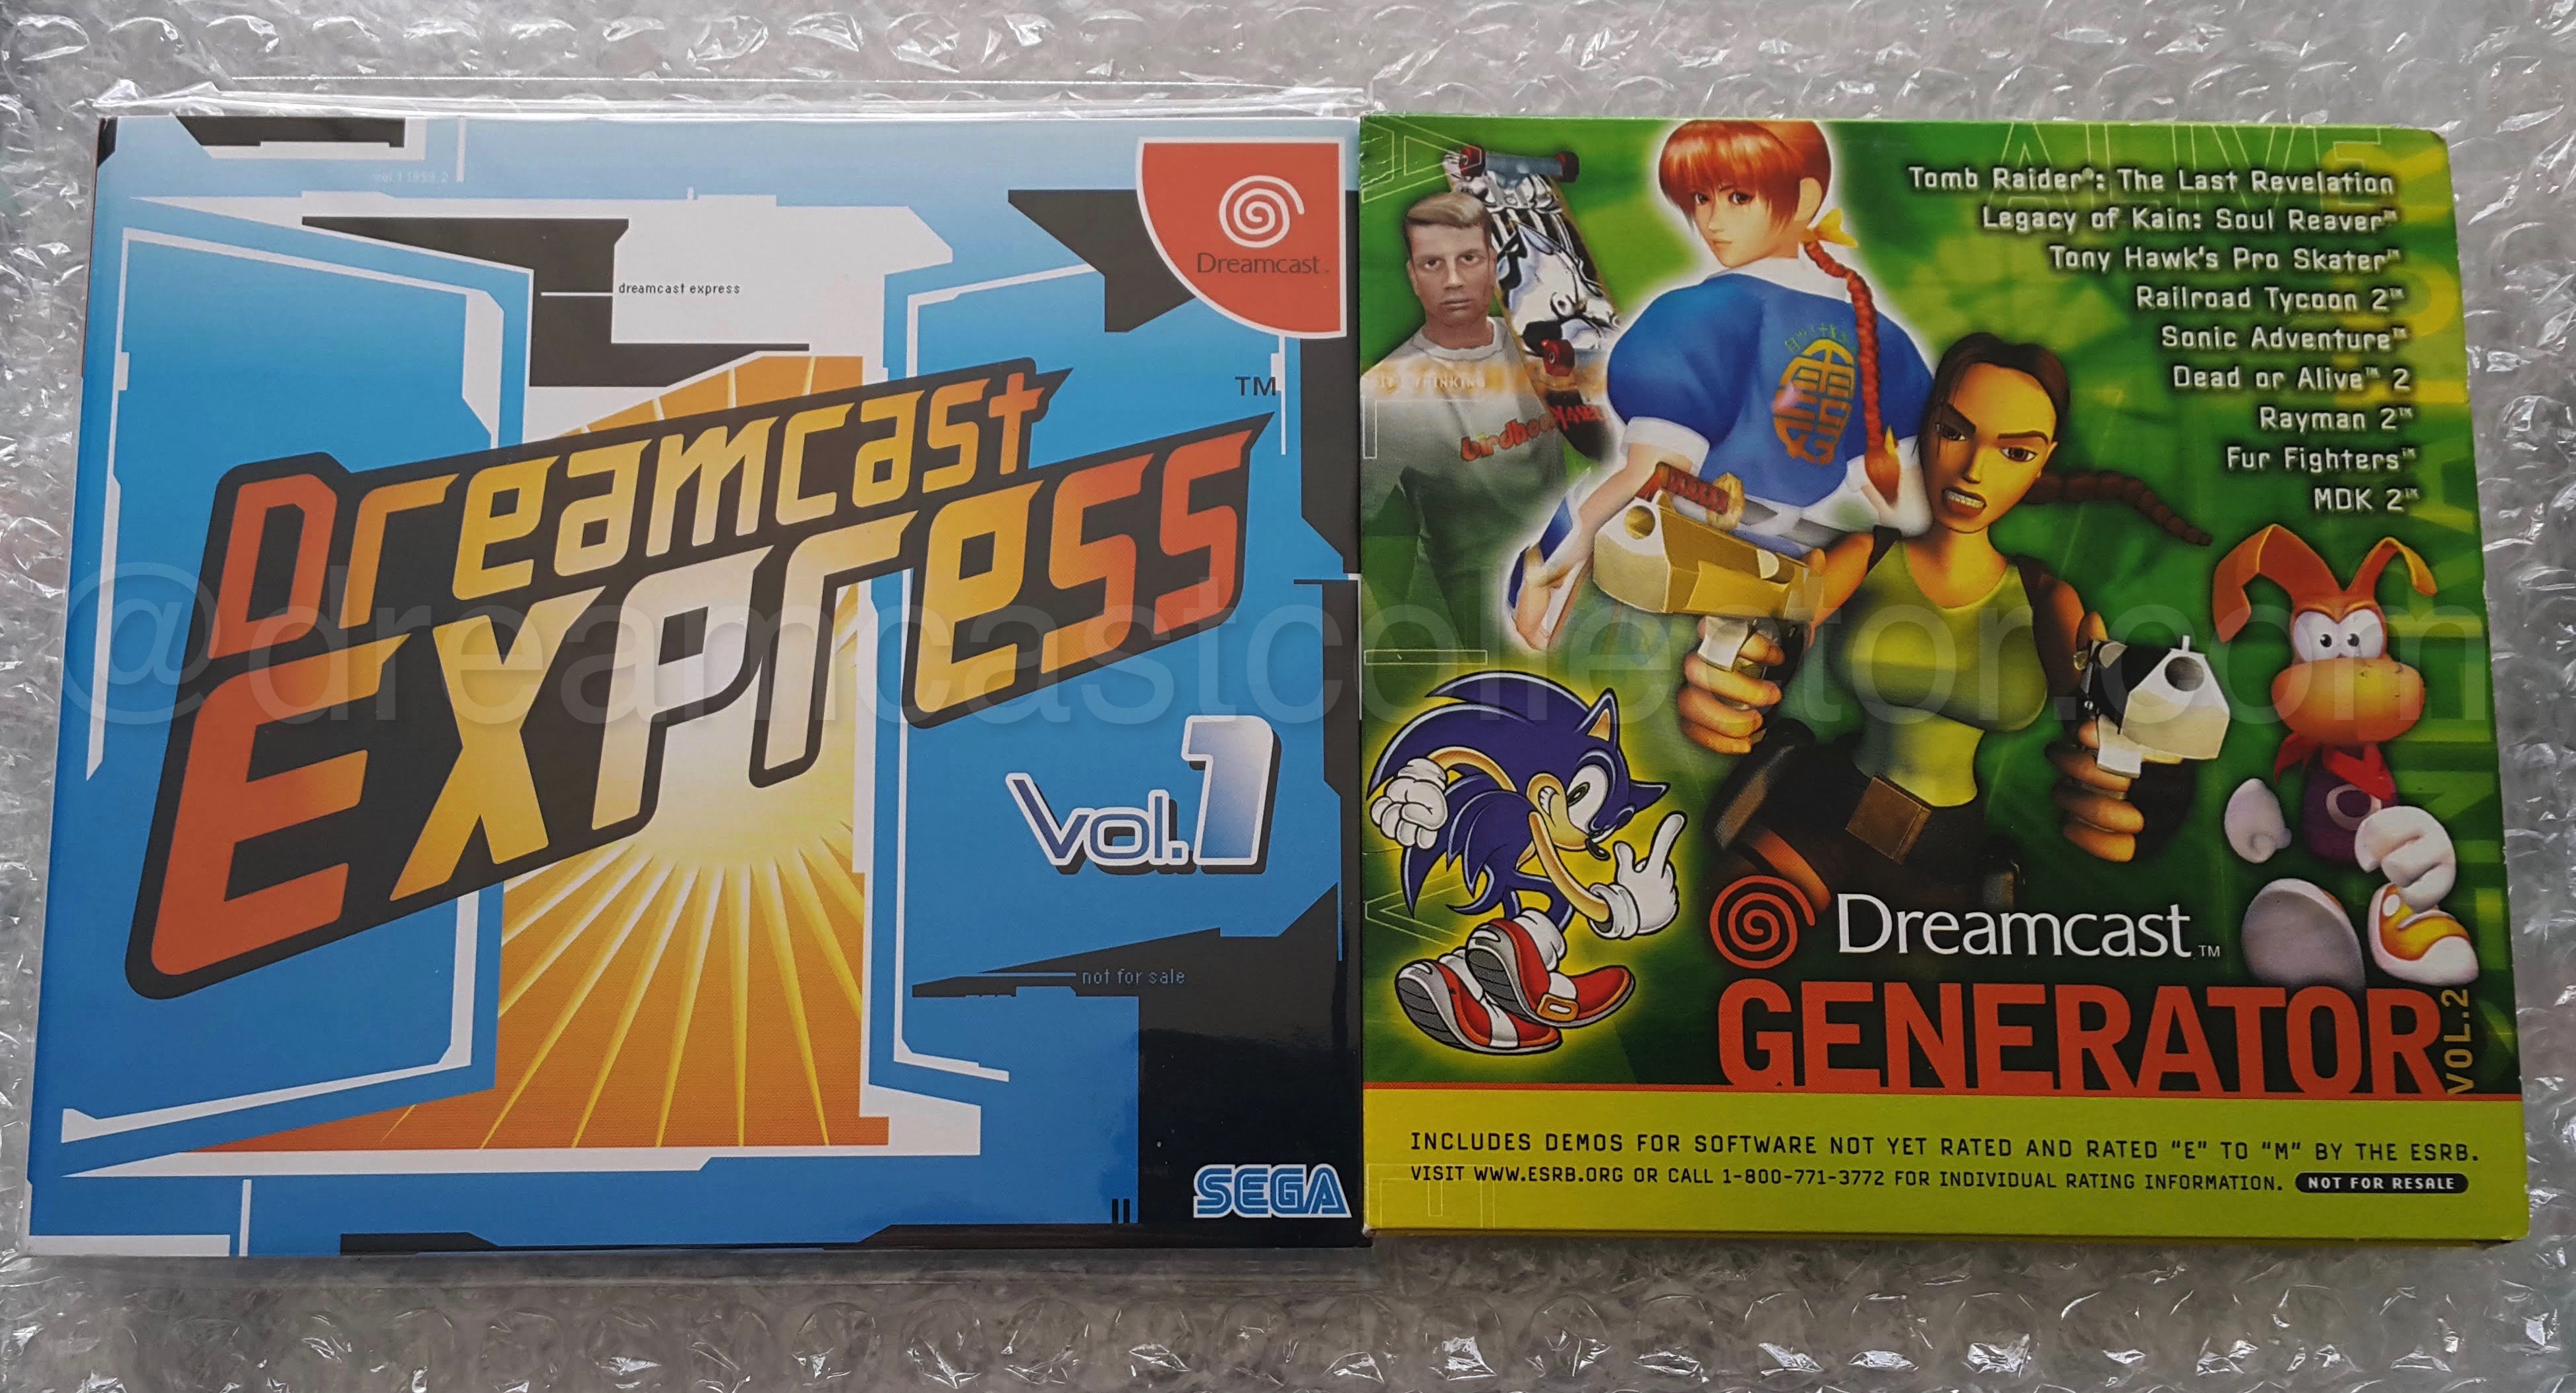 It has to be, said that compared to the multi-game demo discs released in both the NTSC J & NTSC U regions the packaging of the PAL demo discs leaves a lot to be desired.